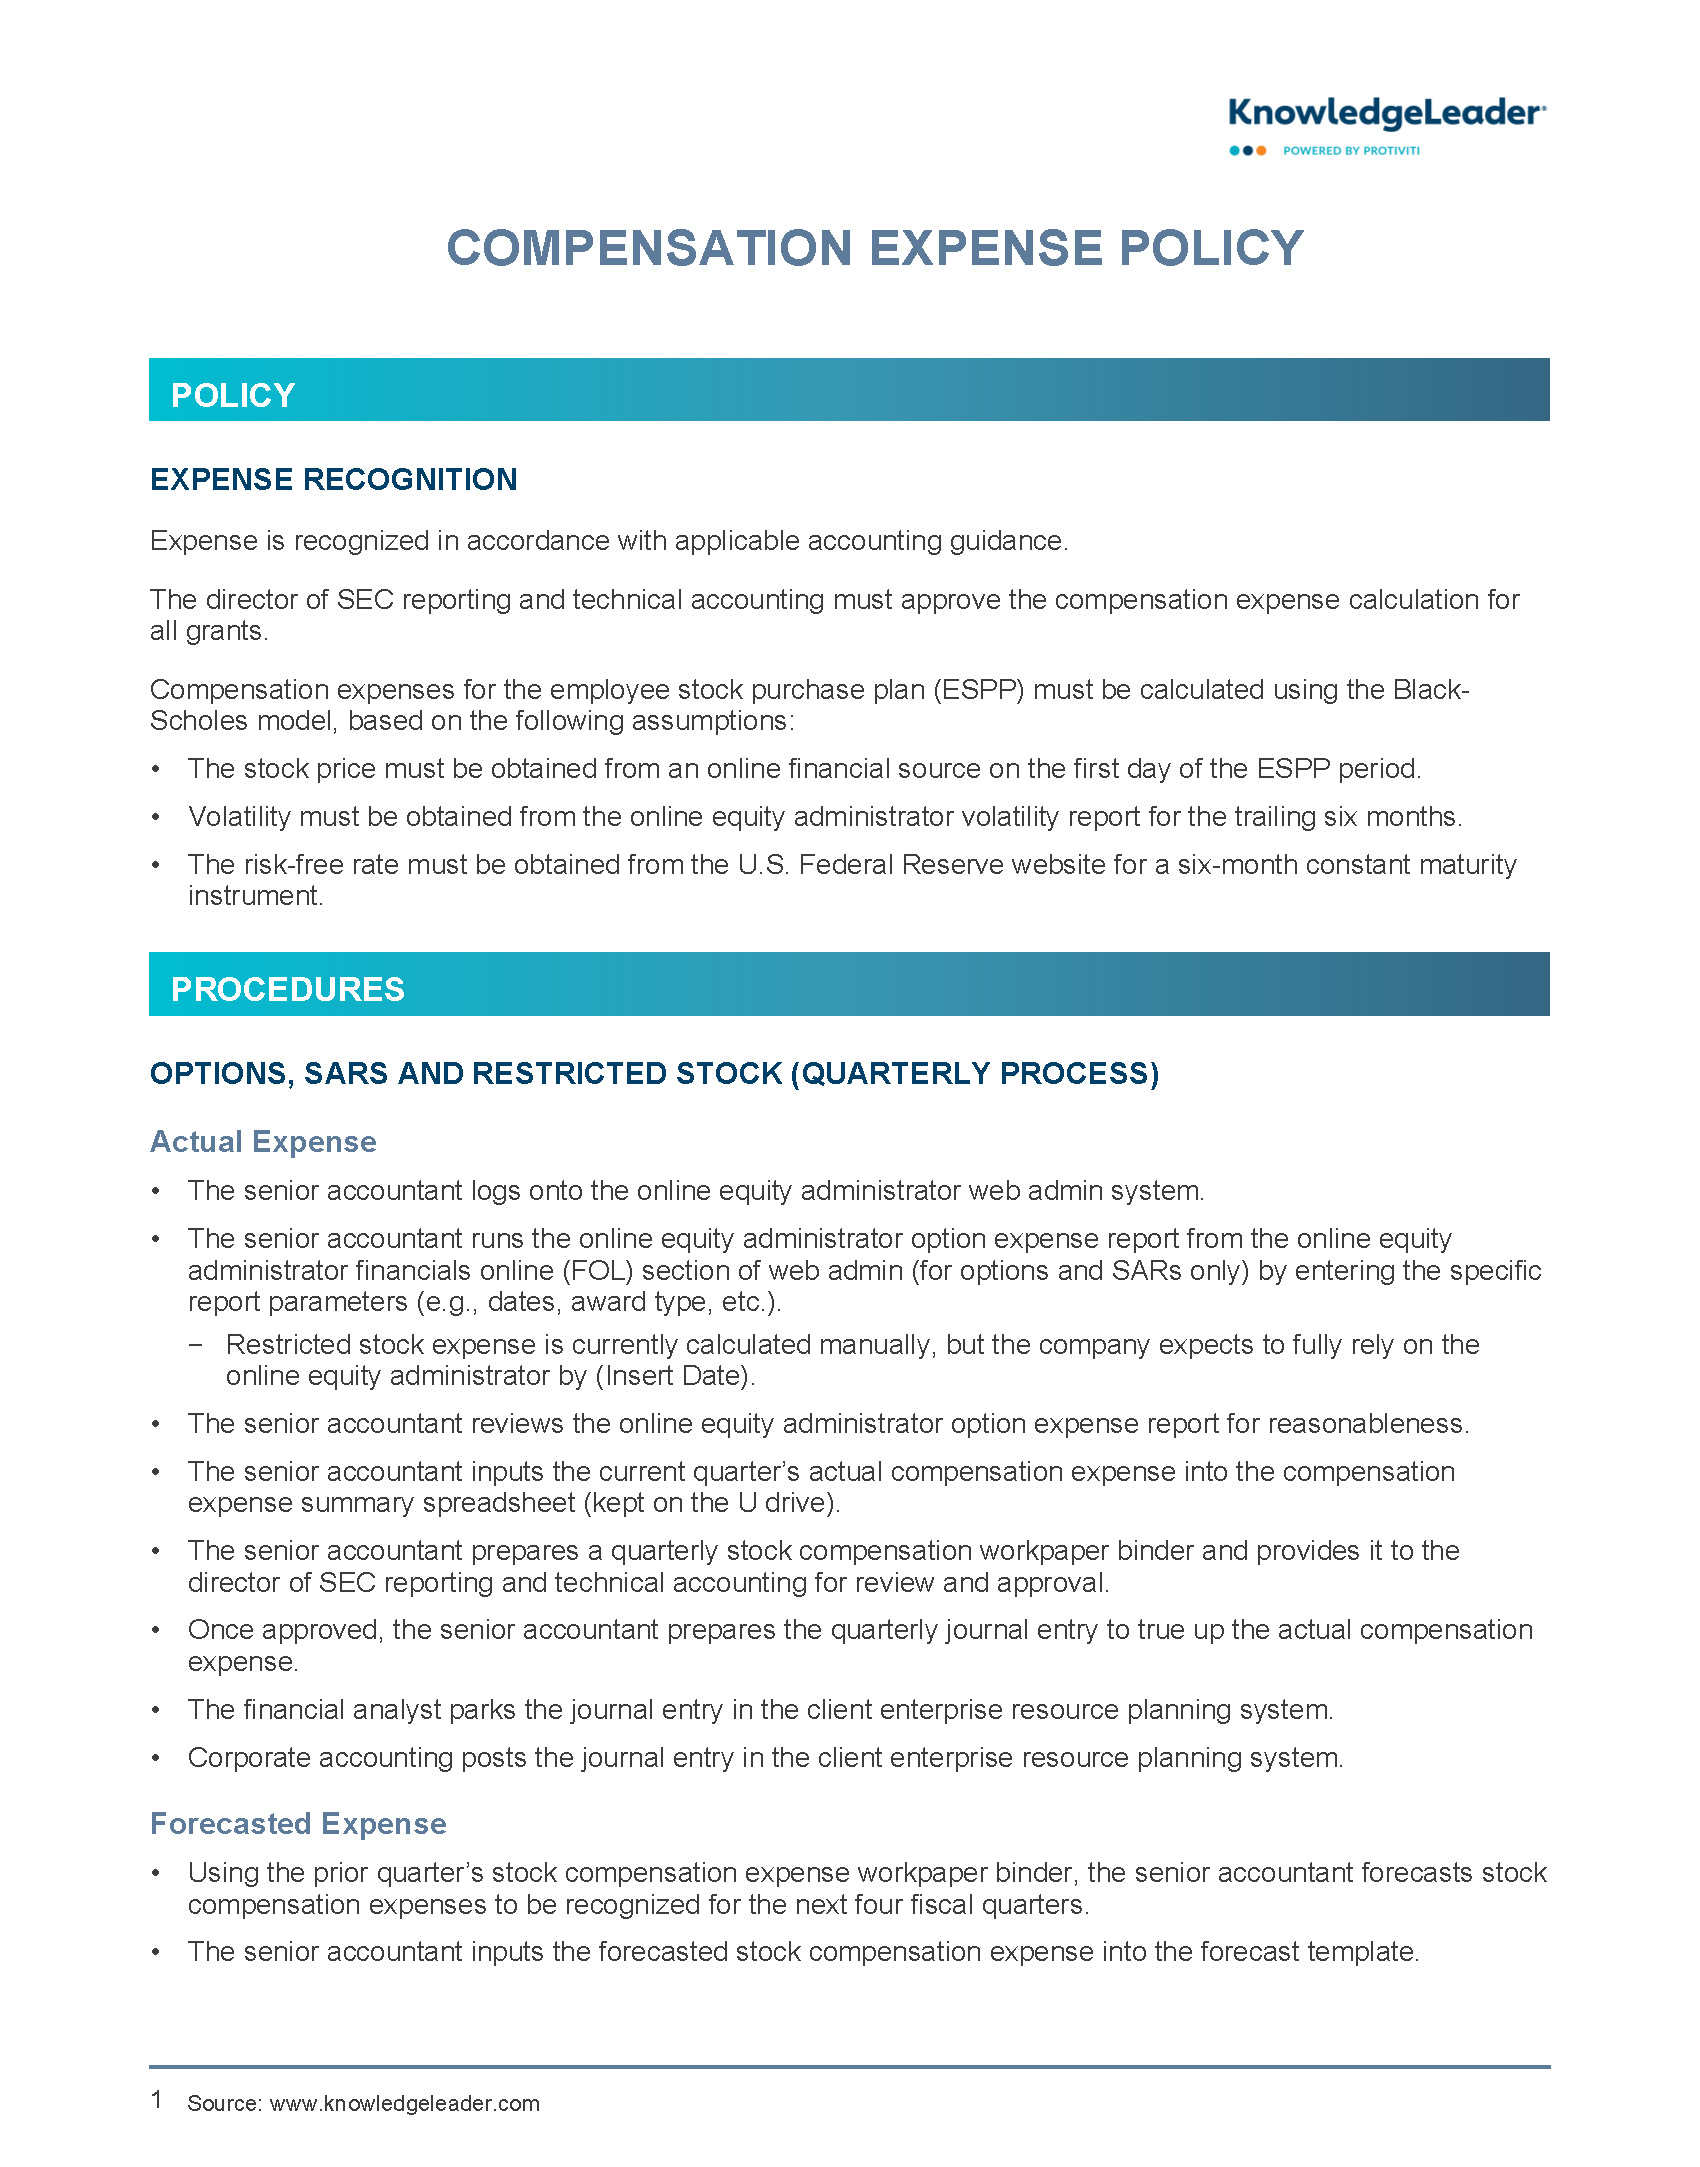 Screenshot of the first page of Compensation Expense Policy